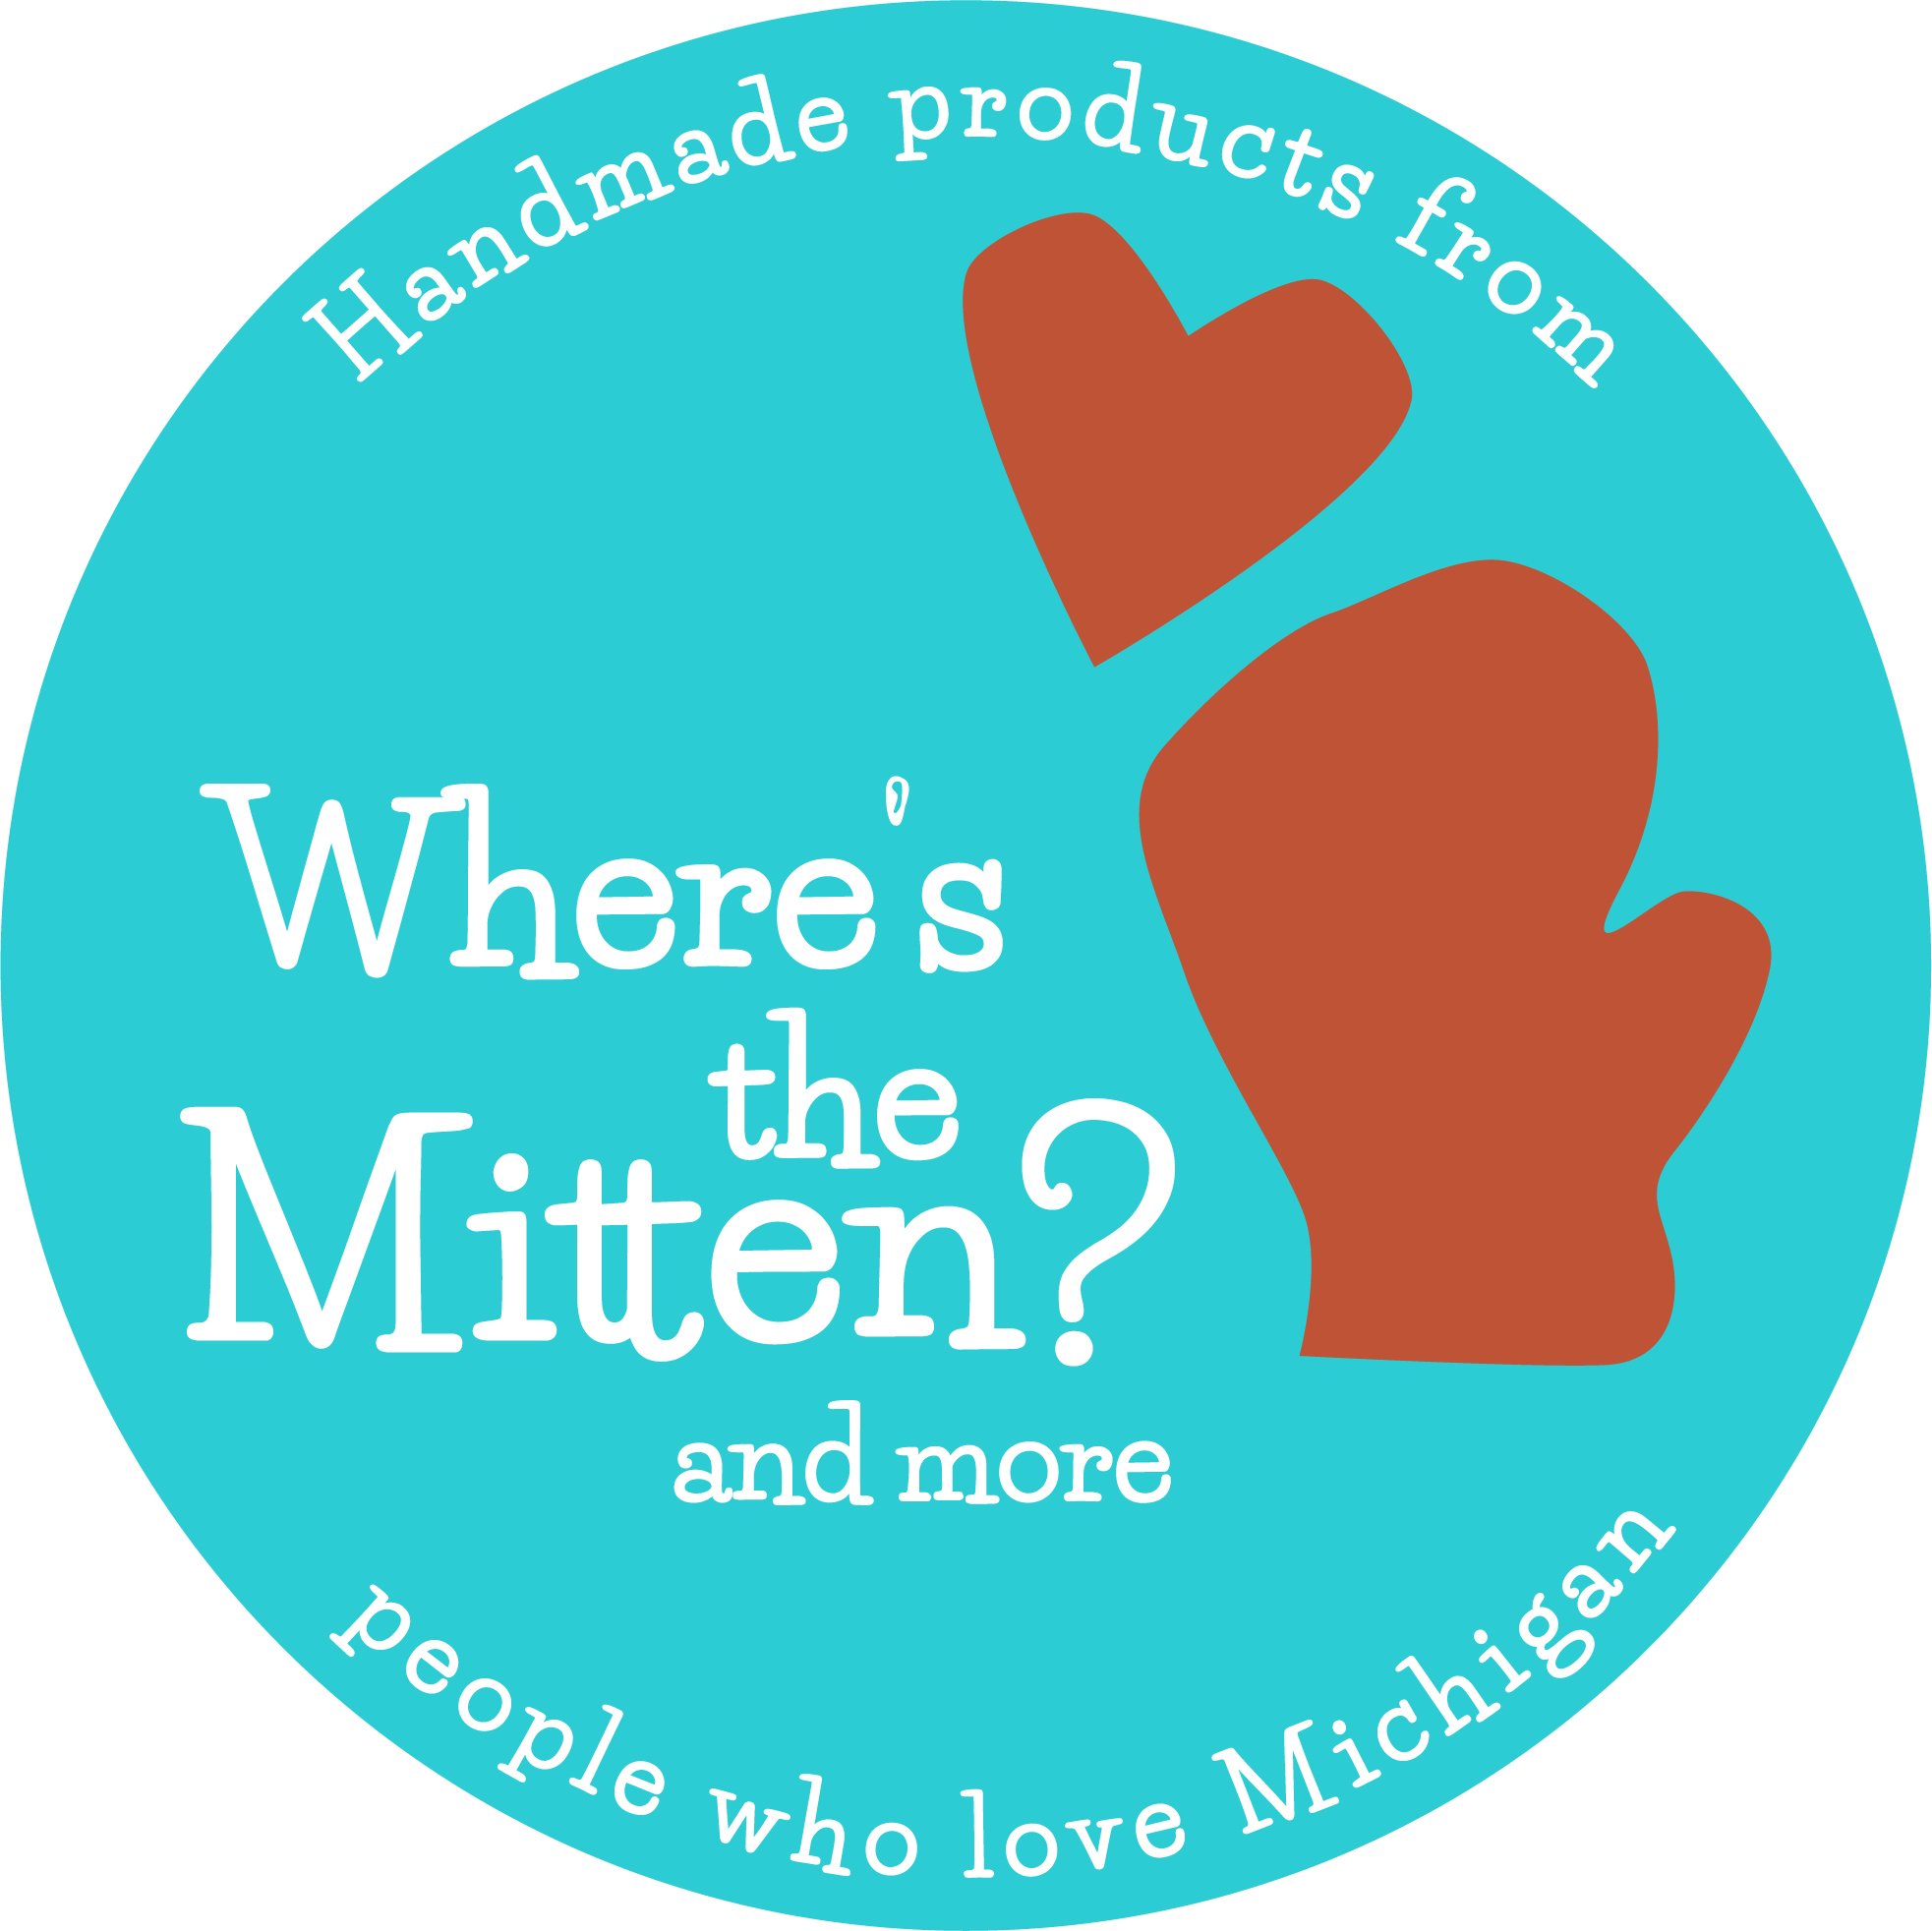 Handmade products from people who love Michigan